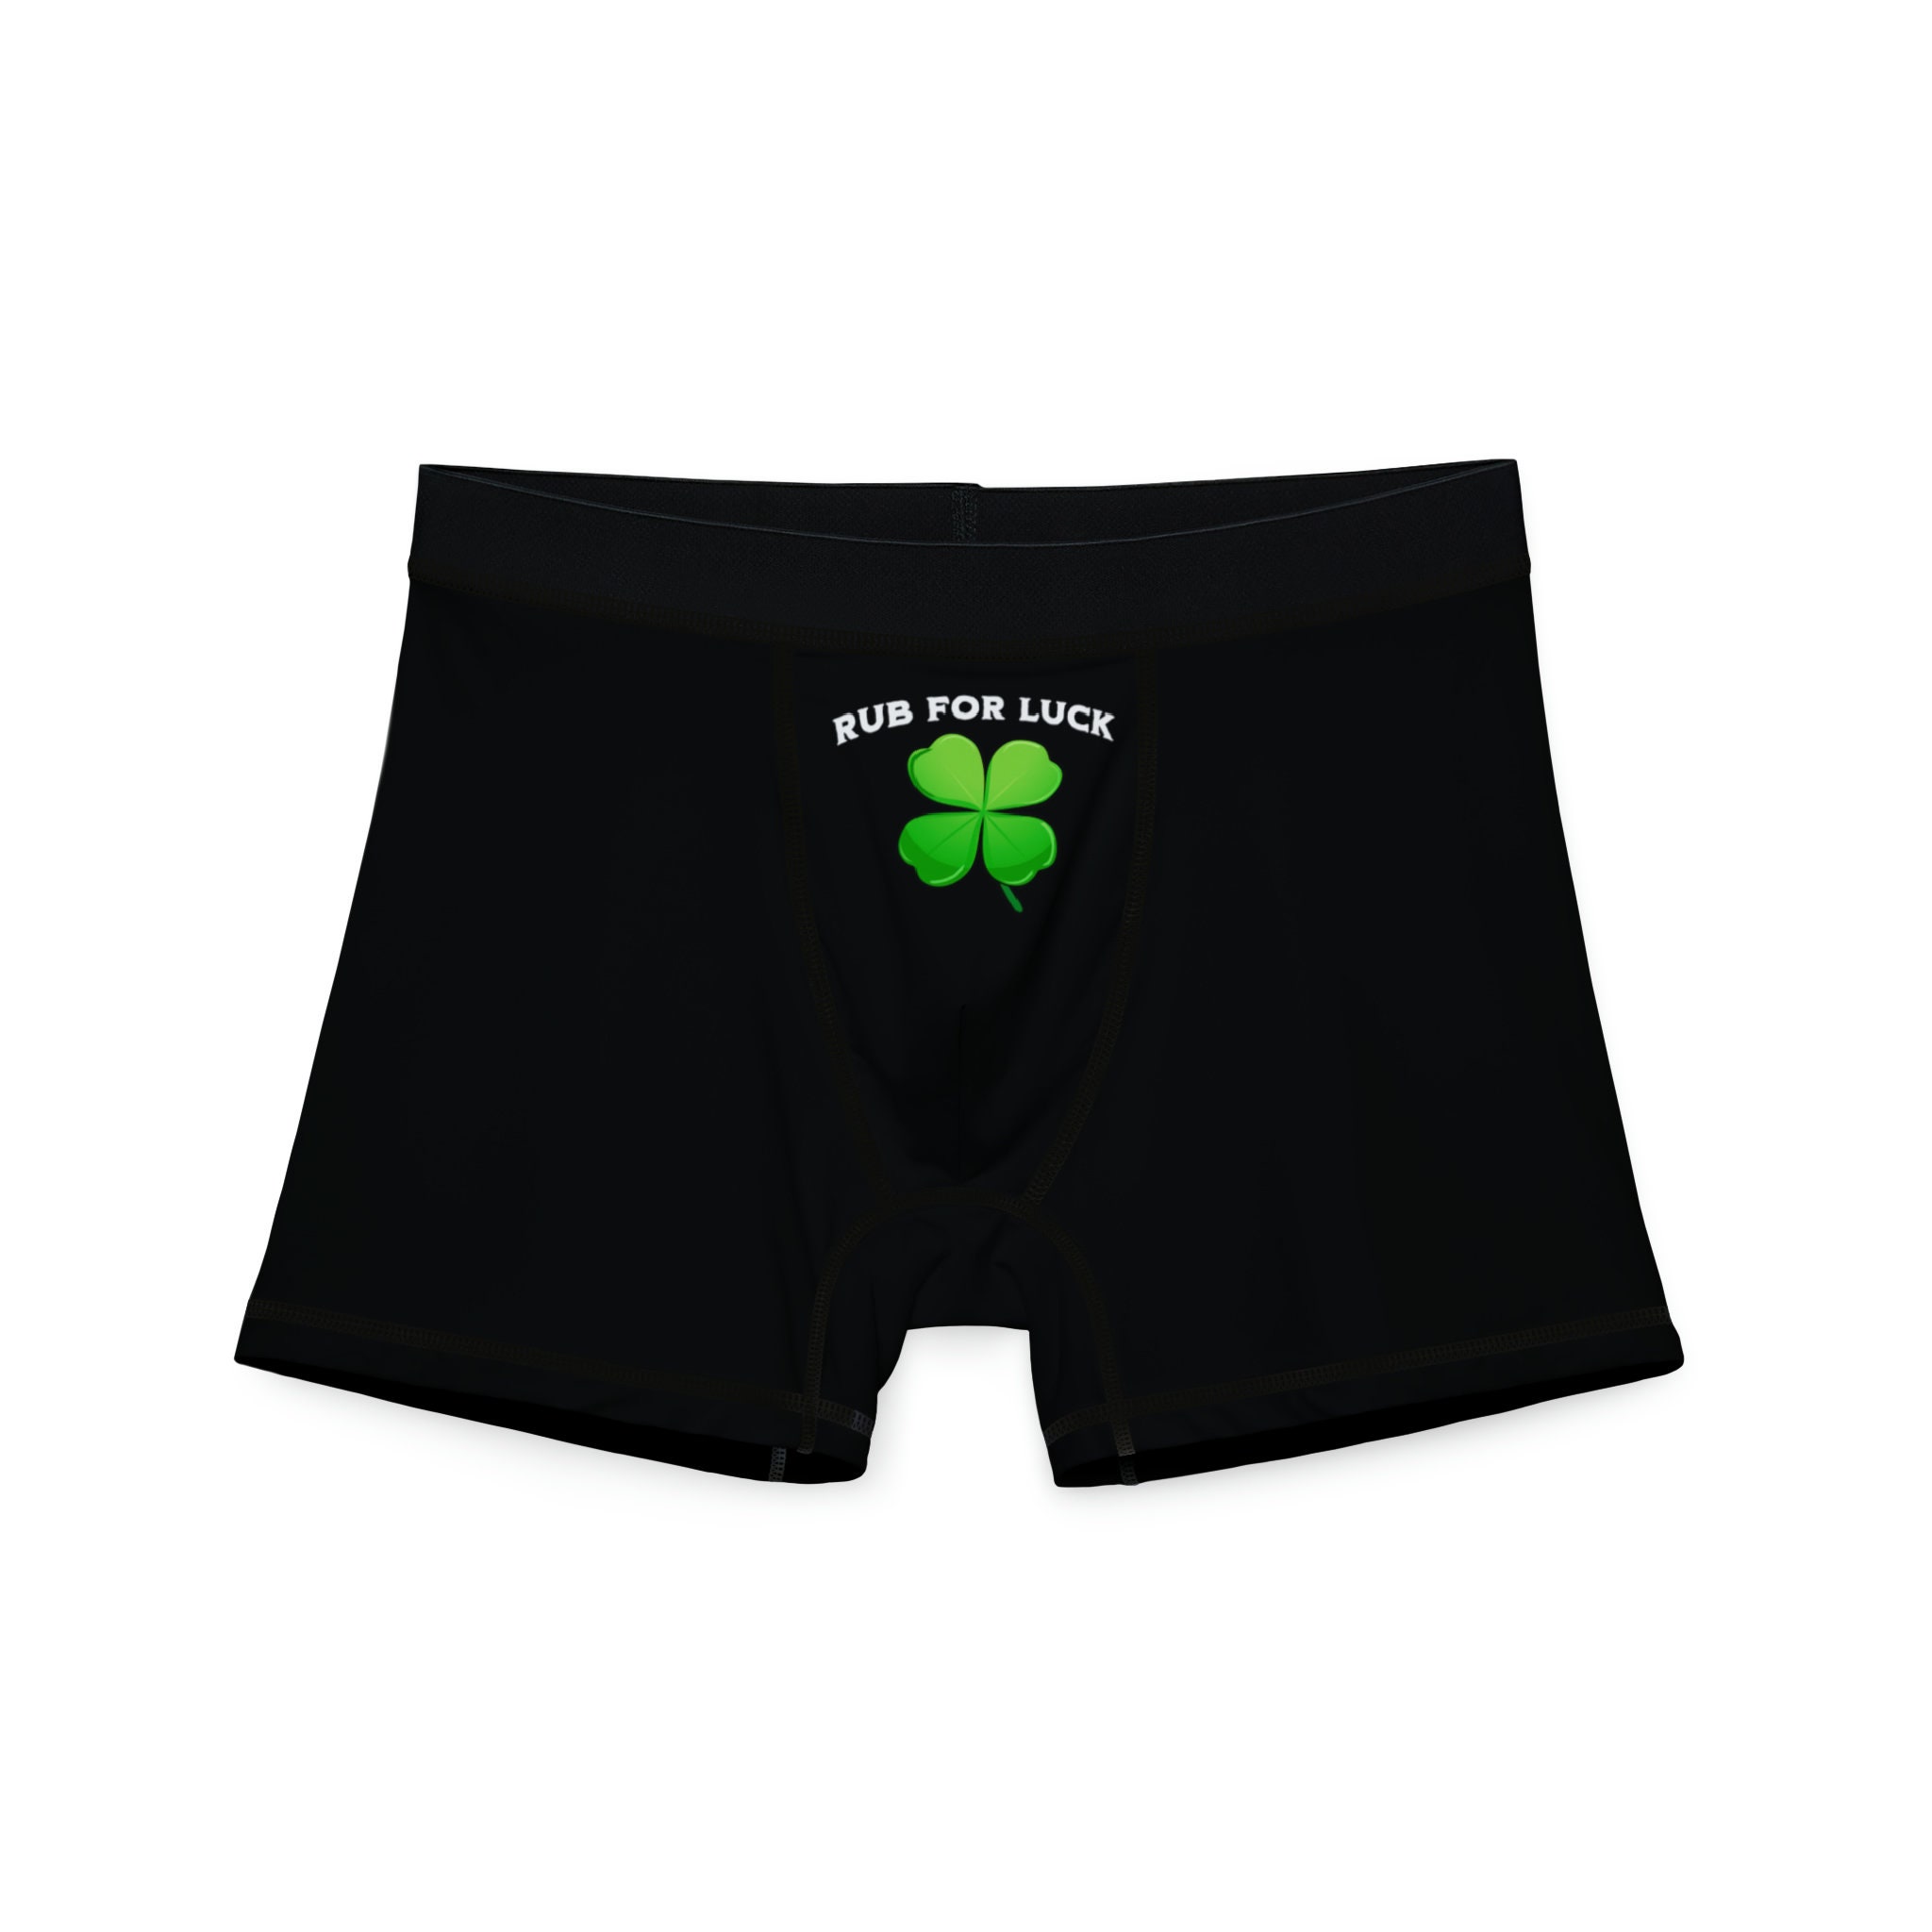 Funny "Rub for Luck" Men's St. Patrick's Day Boxers, Funny Boxer Briefs